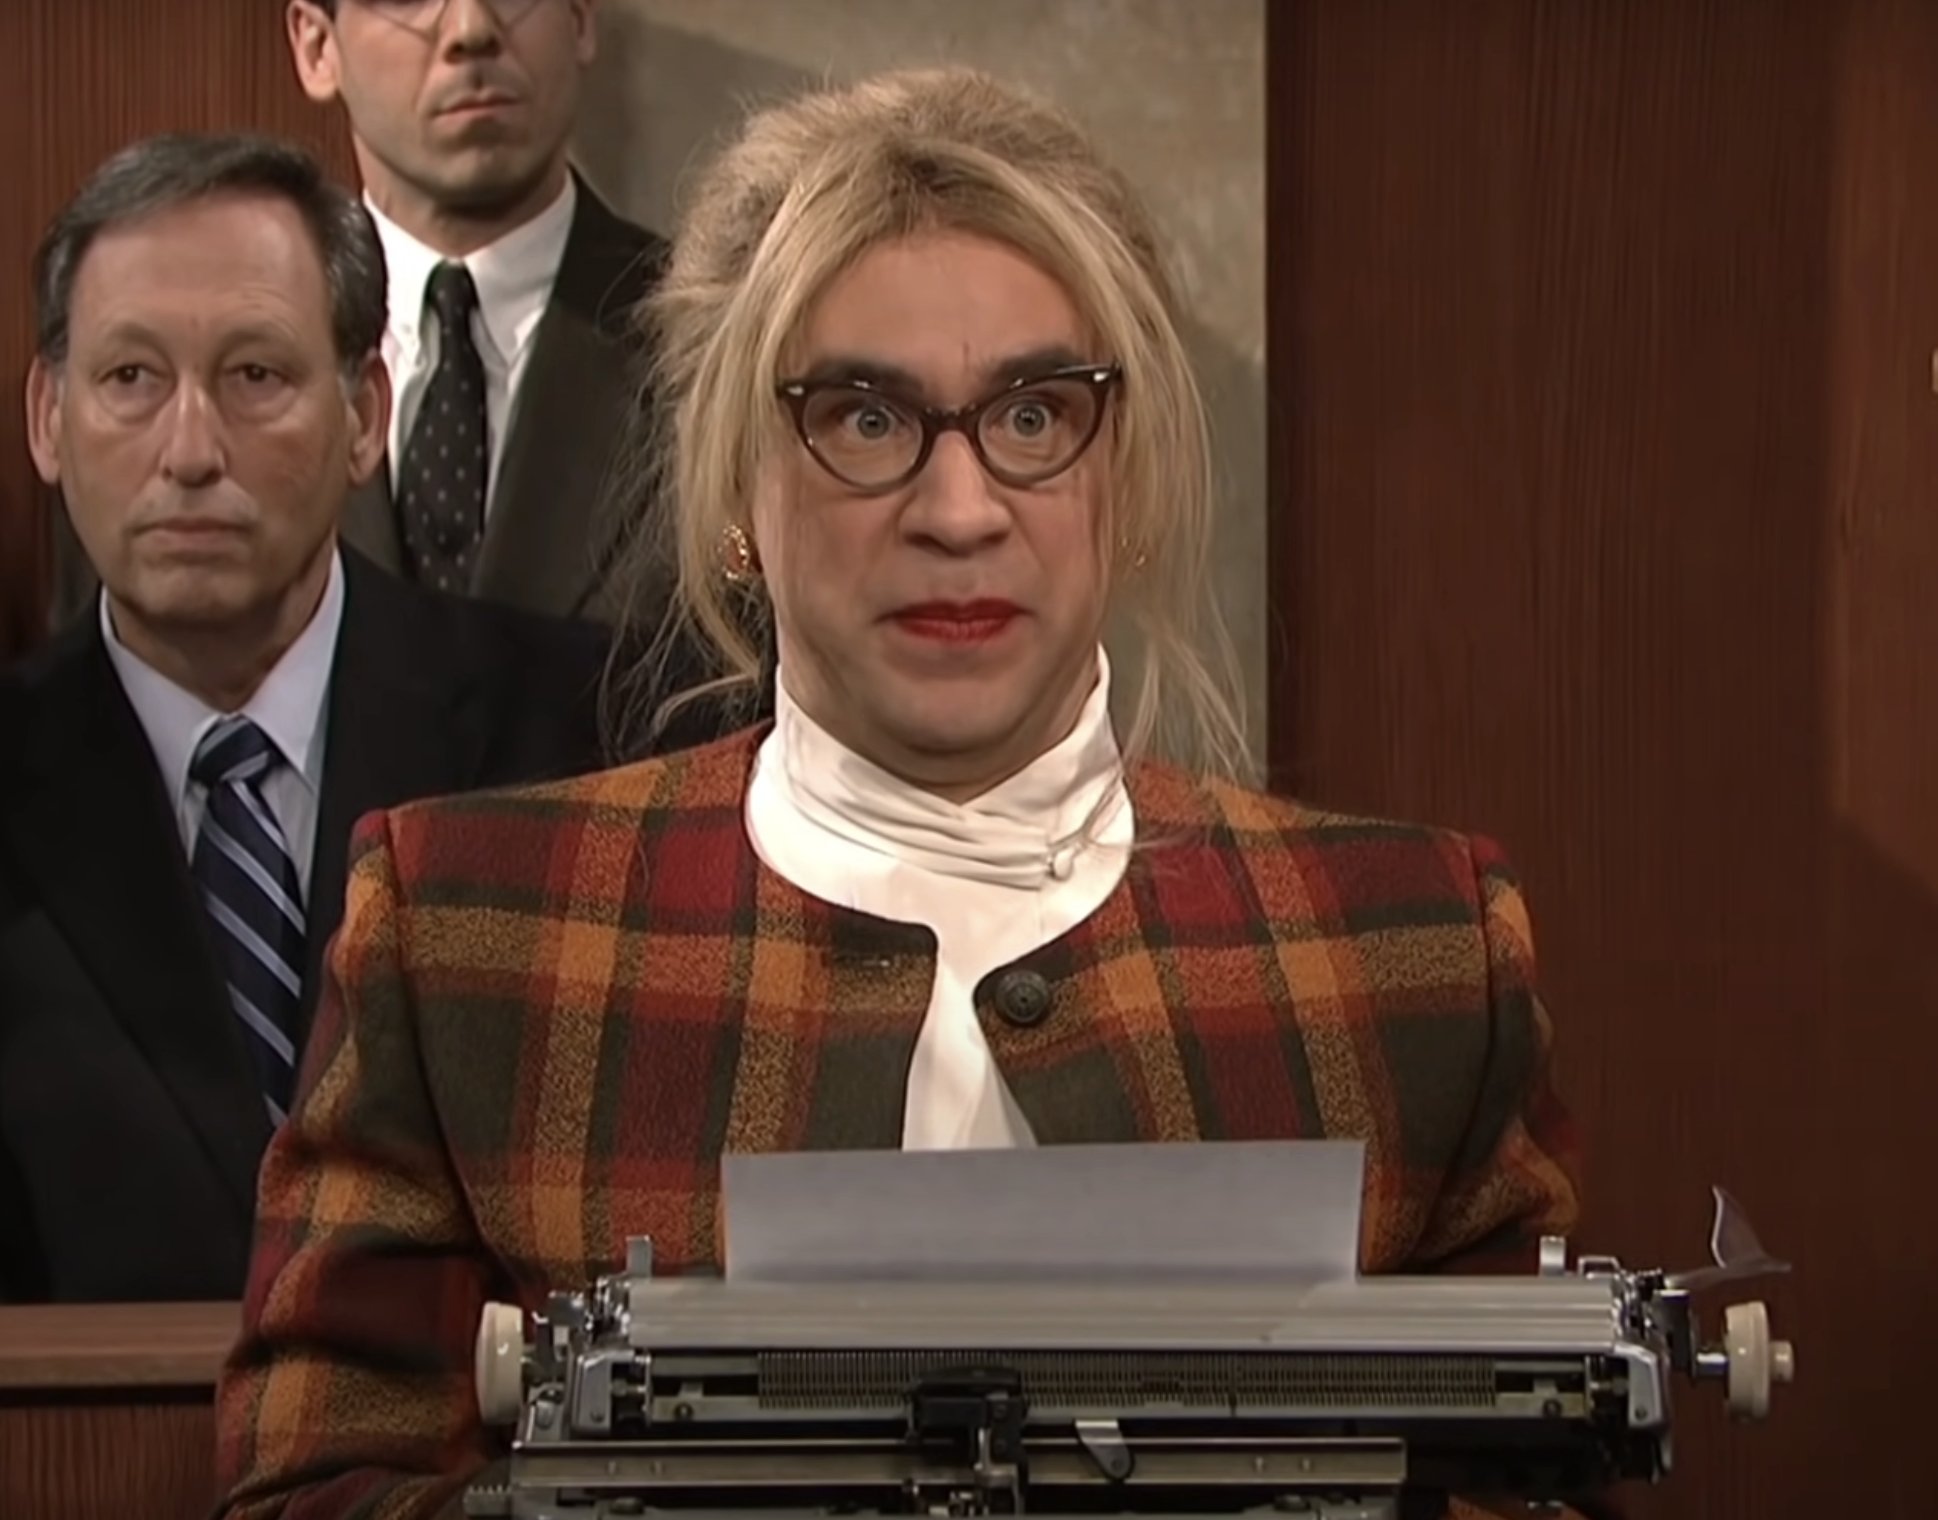 Fred Armisen as a court stenographer on Saturday Night Live